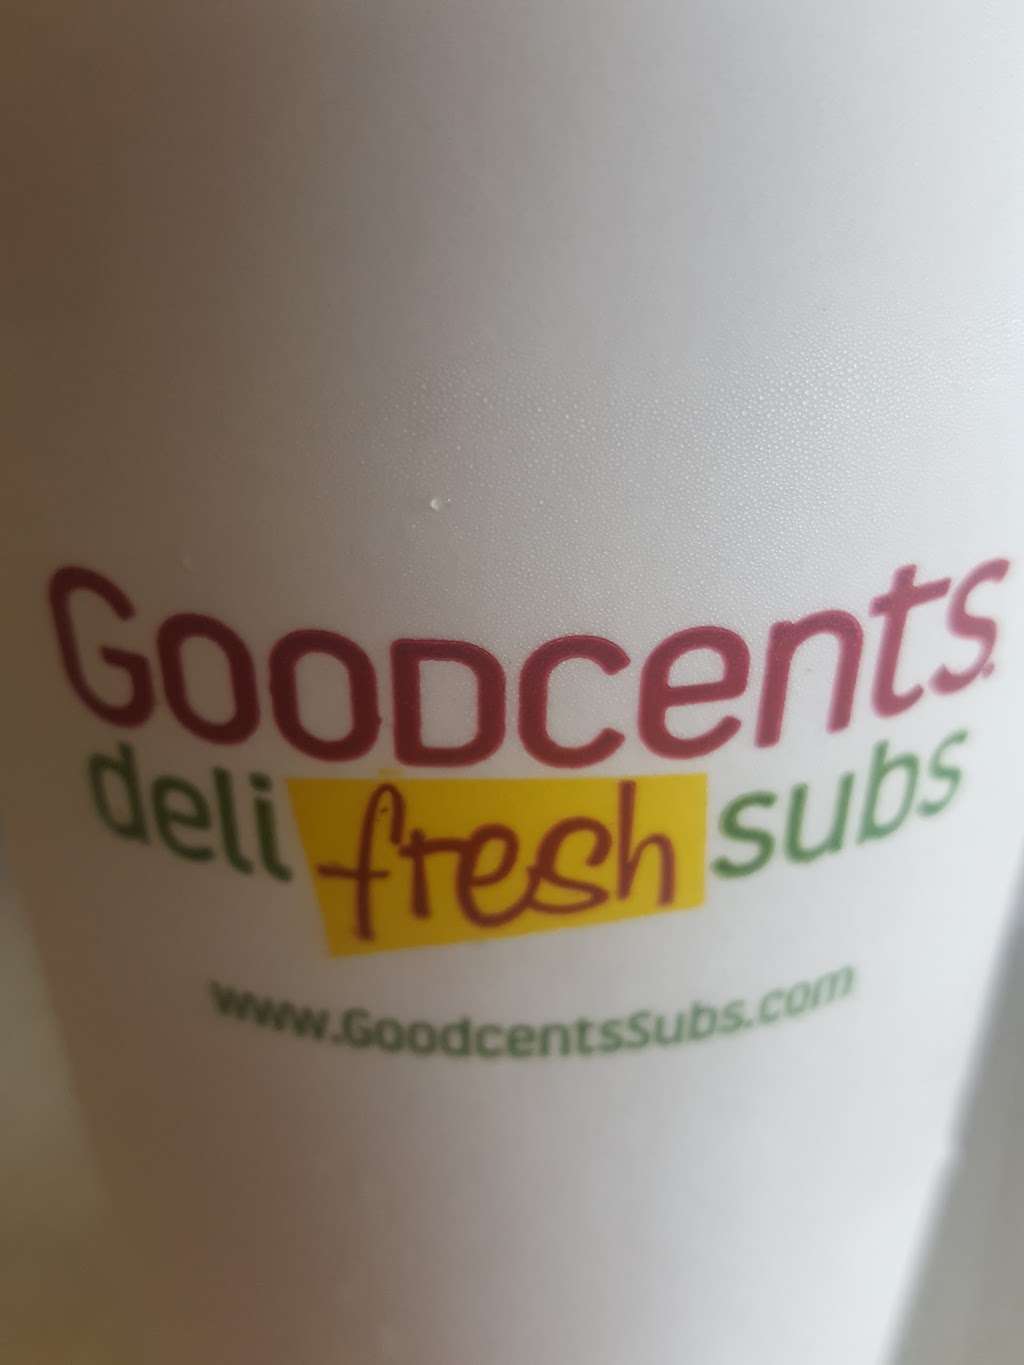 Goodcents Deli Fresh Subs | 1618 South 7th Highway, Blue Springs, MO 64014, USA | Phone: (816) 224-5225